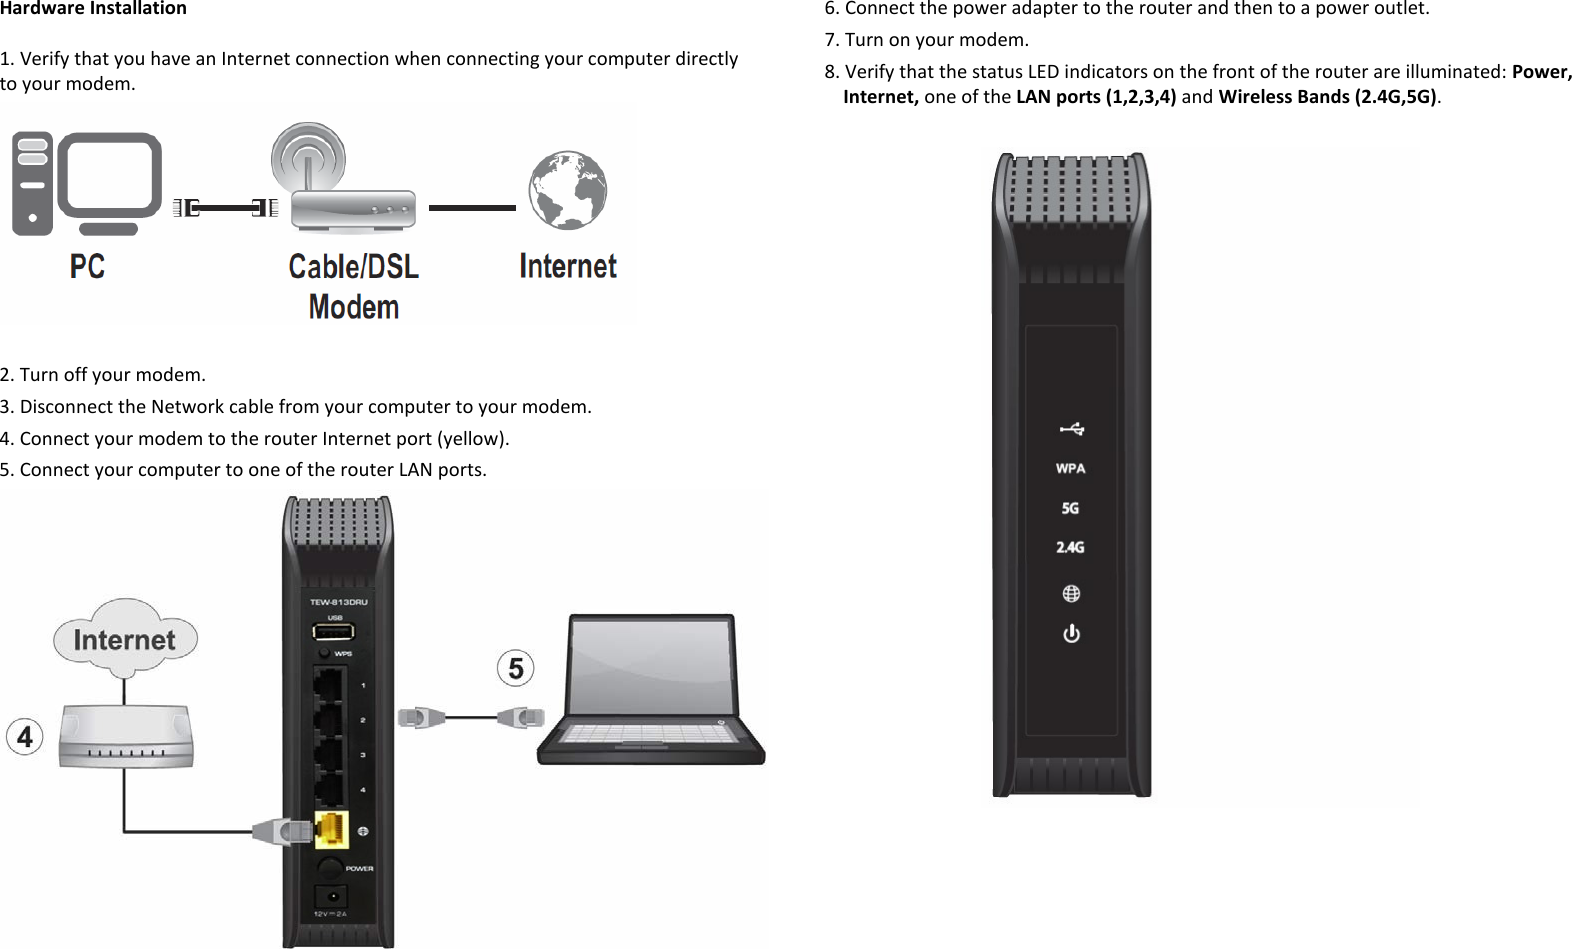 Hardware Installation 1. Verify that you have an Internet connection when connecting your computer directly to your modem.    2. Turn off your modem. 3. Disconnect the Network cable from your computer to your modem. 4. Connect your modem to the router Internet port (yellow). 5. Connect your computer to one of the router LAN ports.    6. Connect the power adapter to the router and then to a power outlet. 7. Turn on your modem.  8. Verify that the status LED indicators on the front of the router are illuminated: Power, Internet, one of the LAN ports (1,2,3,4) and Wireless Bands (2.4G,5G).       